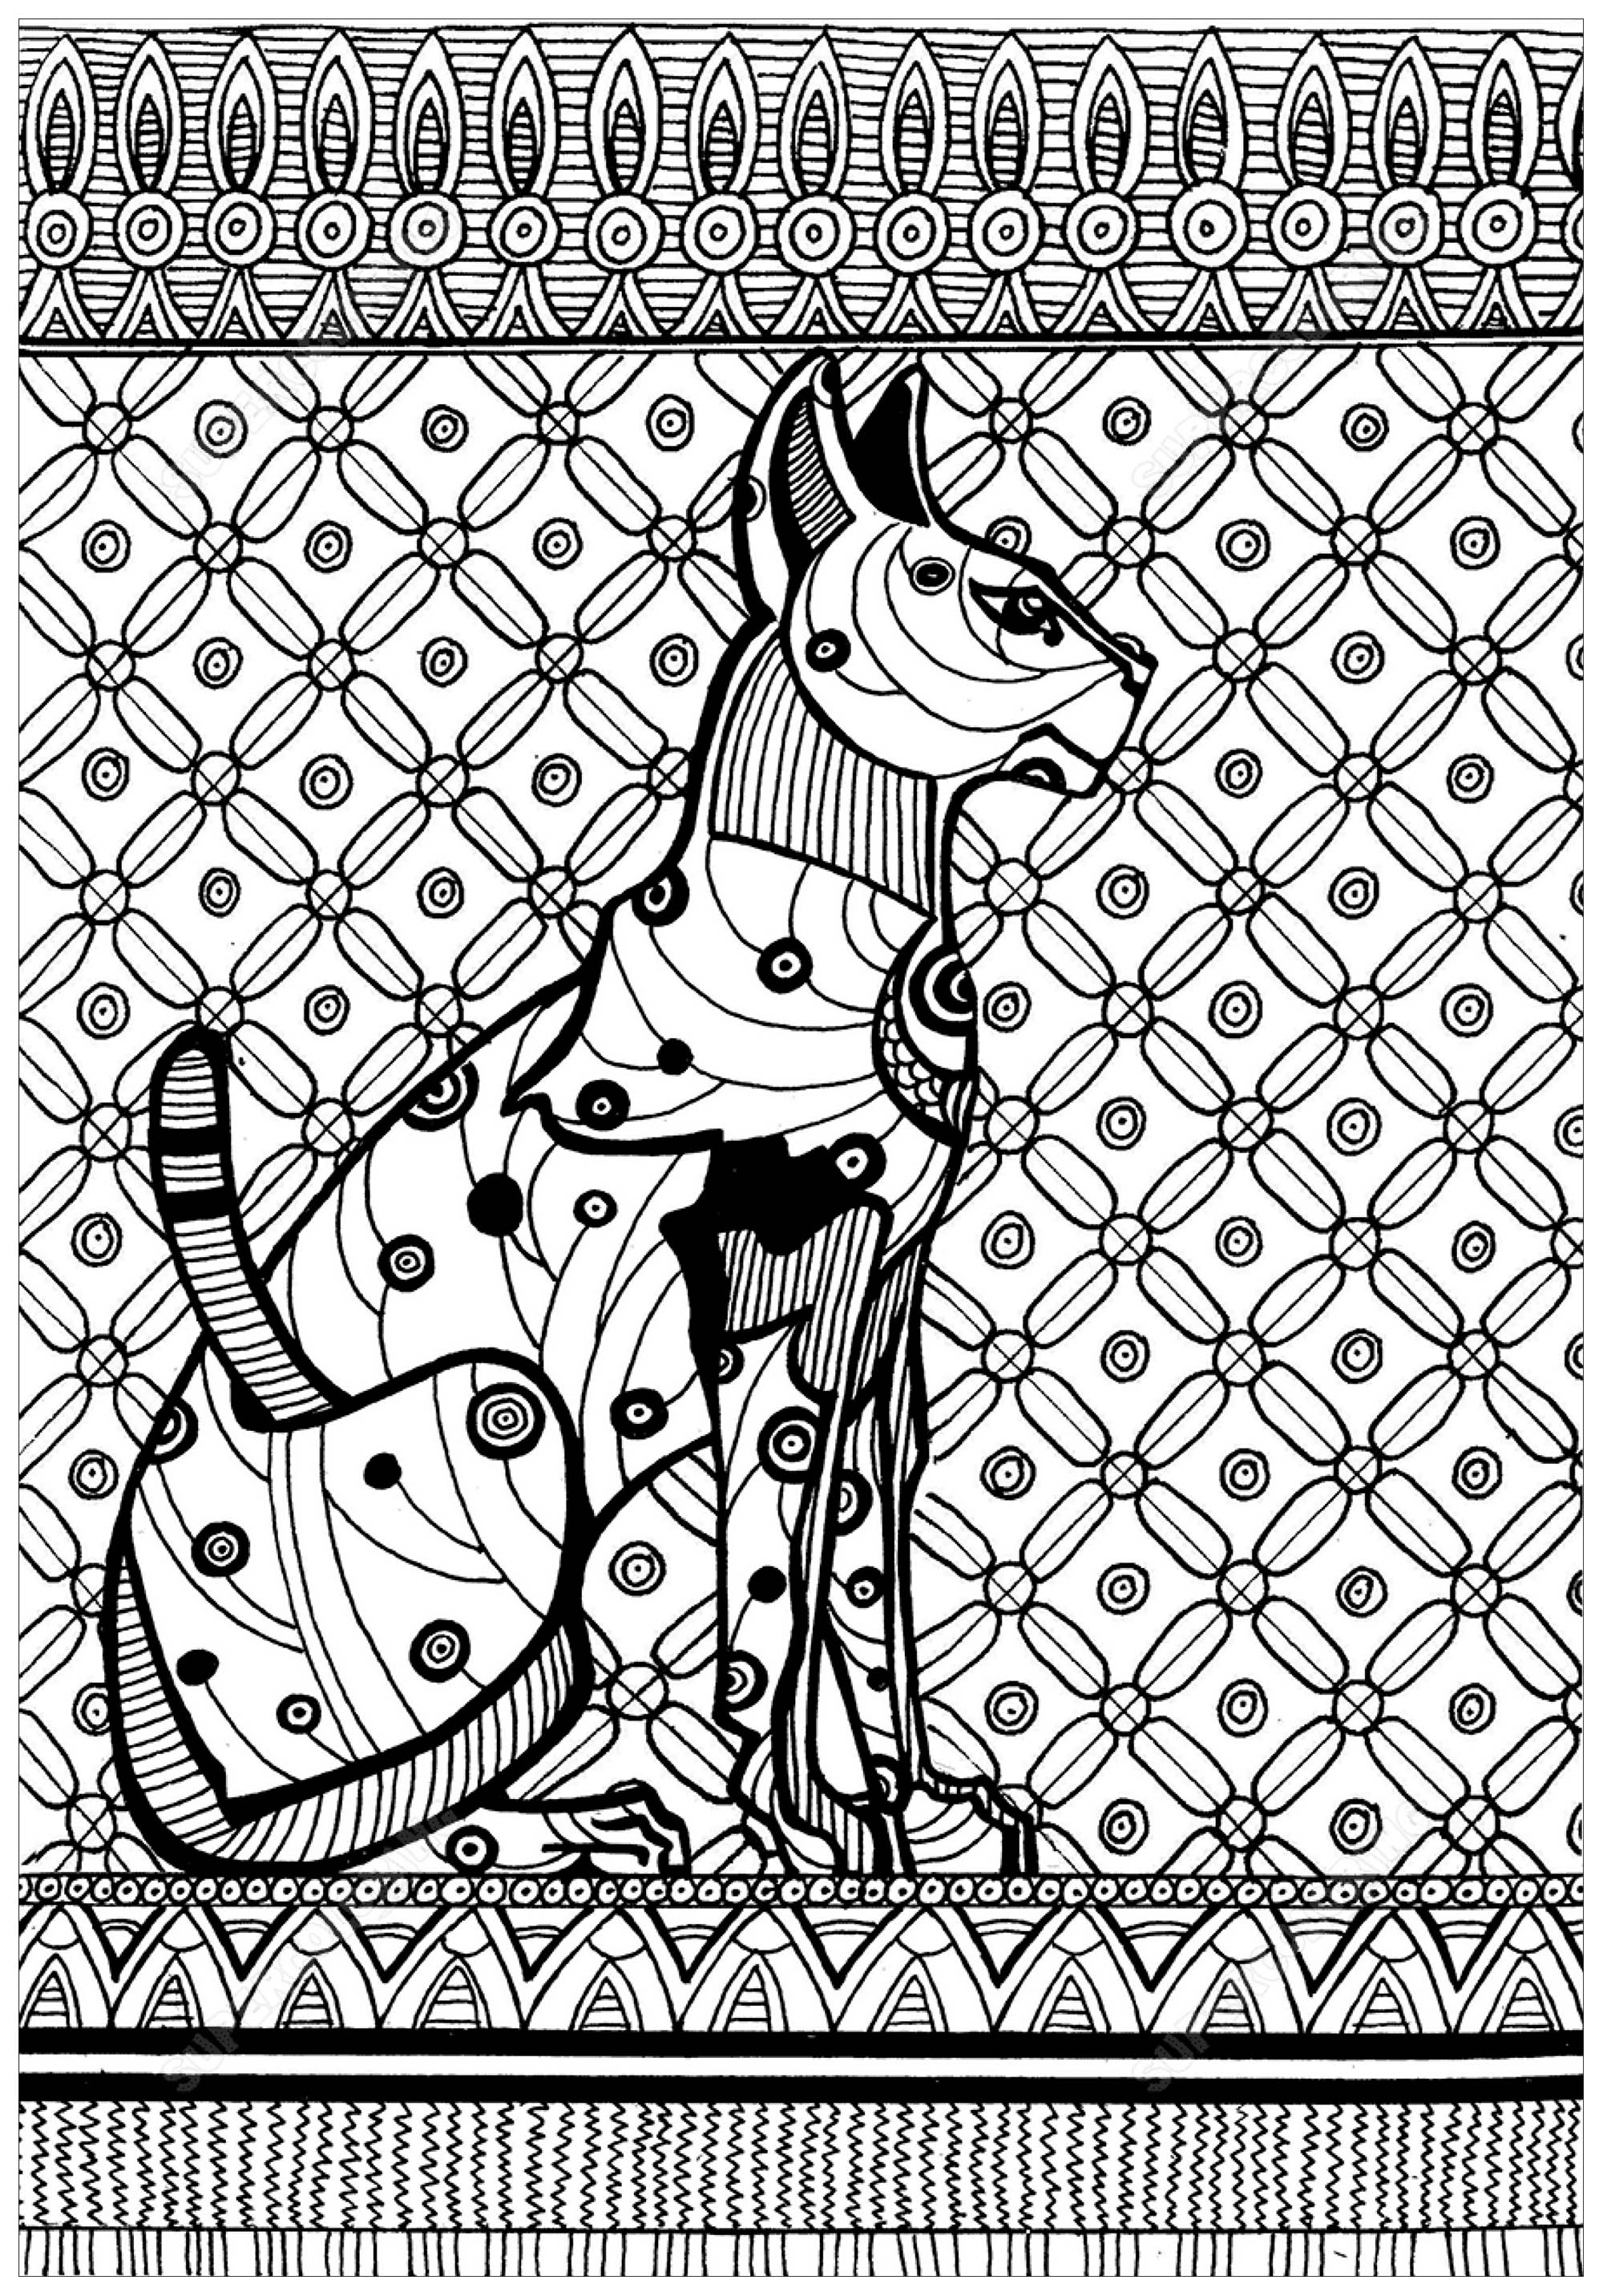 Egyptian cat with drawing inspired by Ancient Egypt art